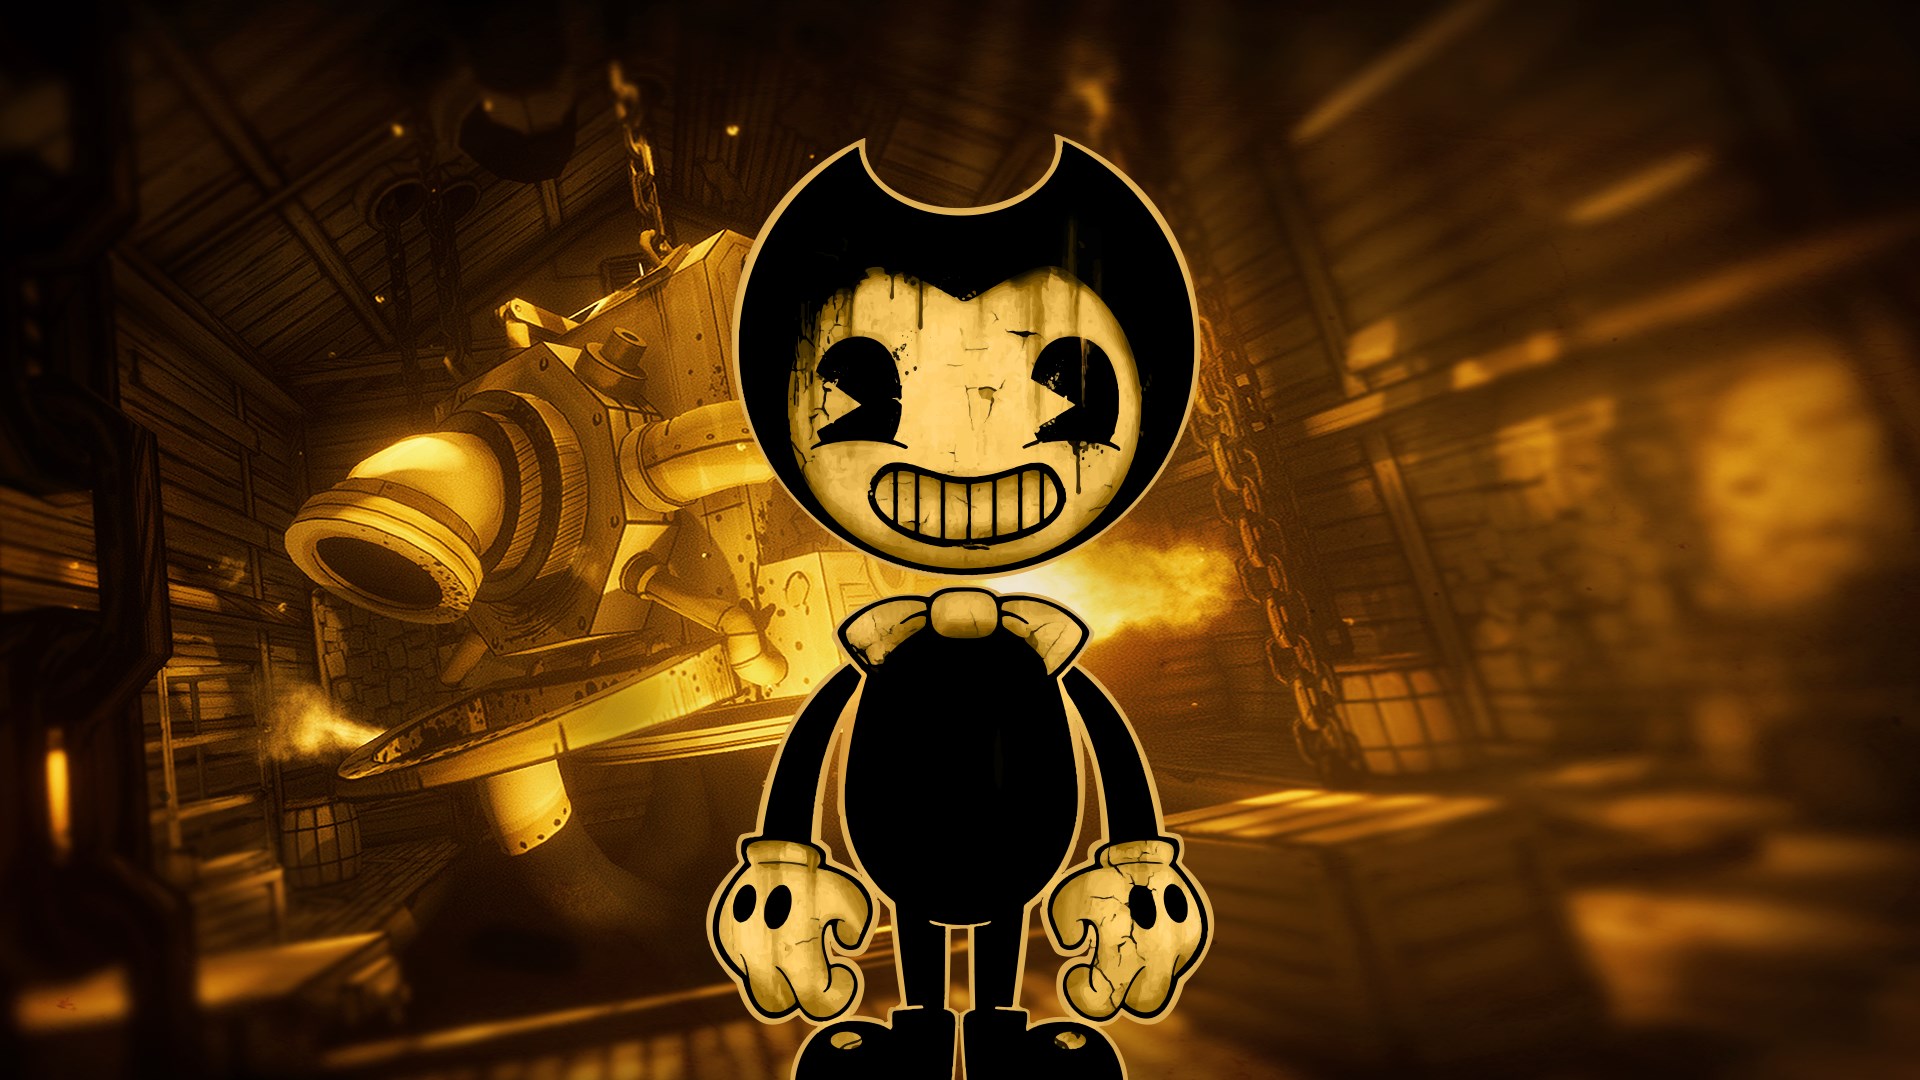 bendy and the ink machine xbox one digital download